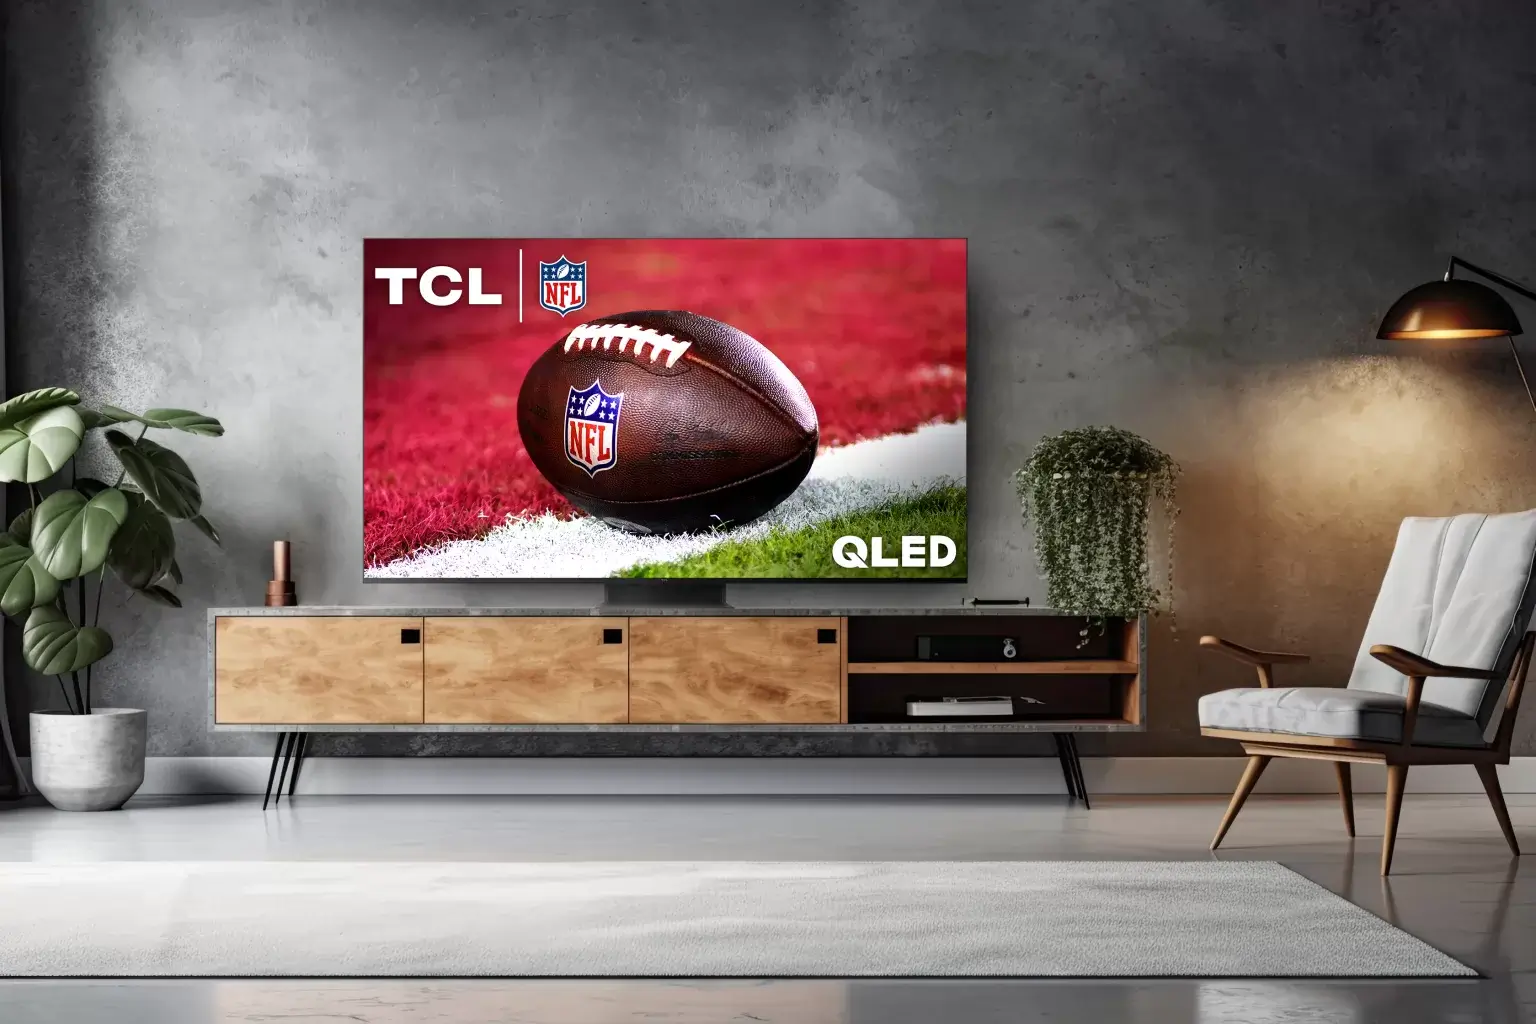 TCL's 2023 TV lineup offers enhanced picture and gaming capabilities.